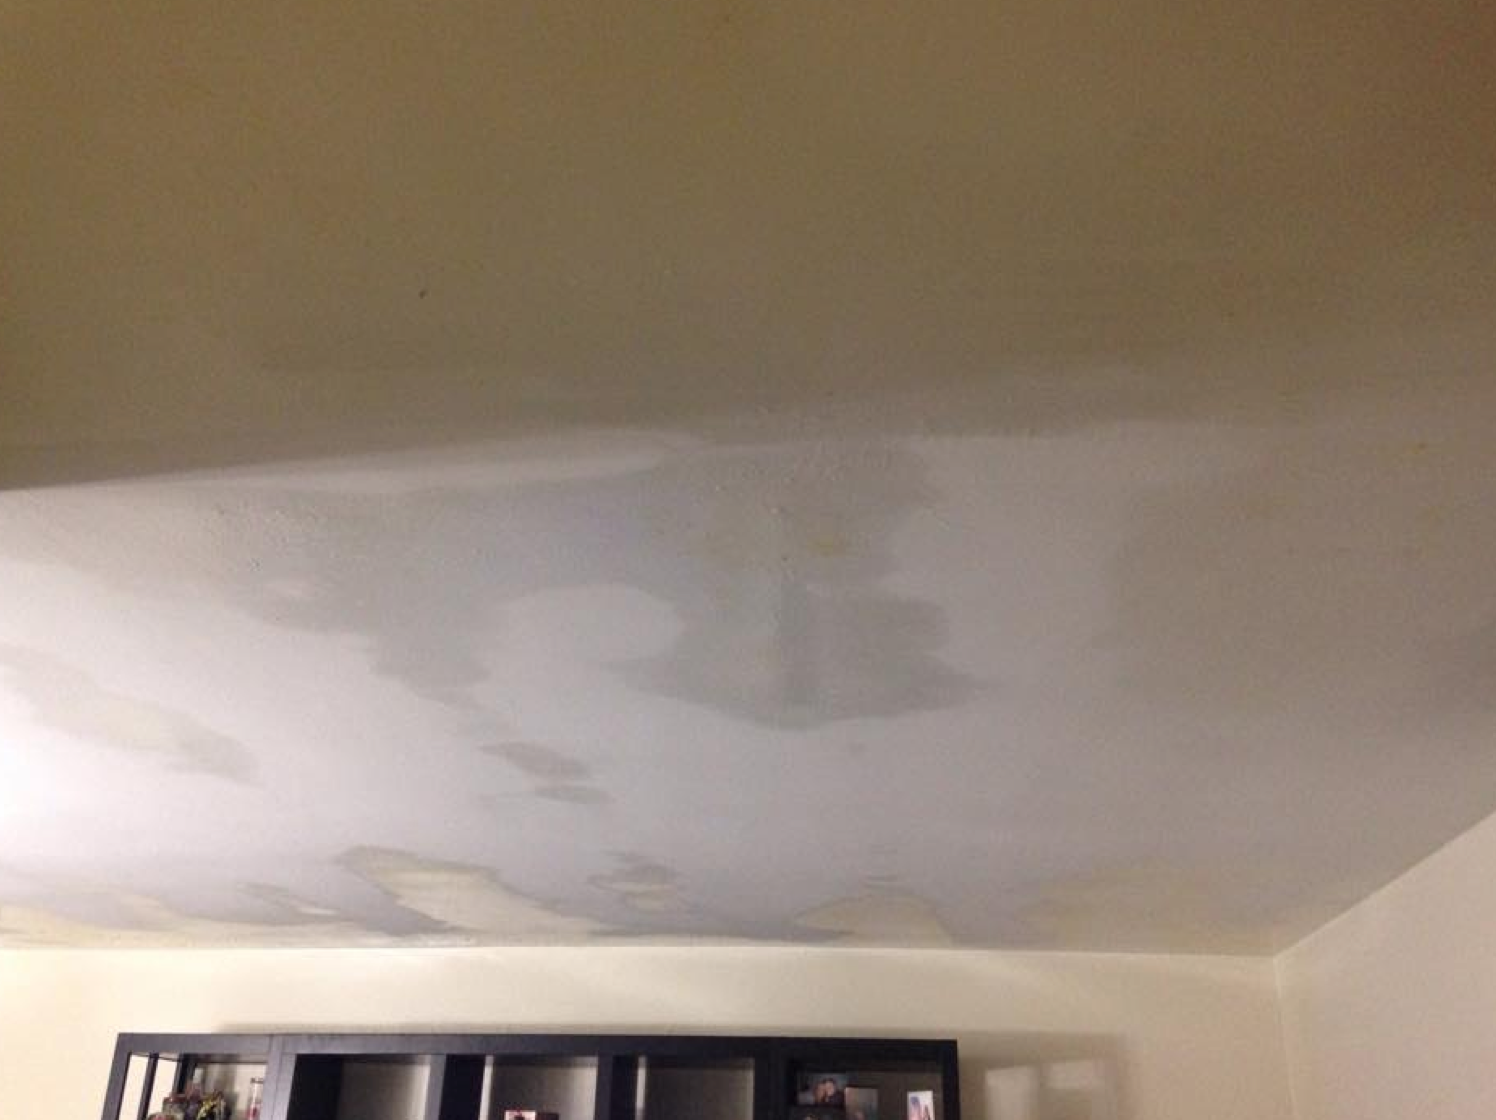 Armstrong Court top floor apartment with ceiling leak. Contributed photo